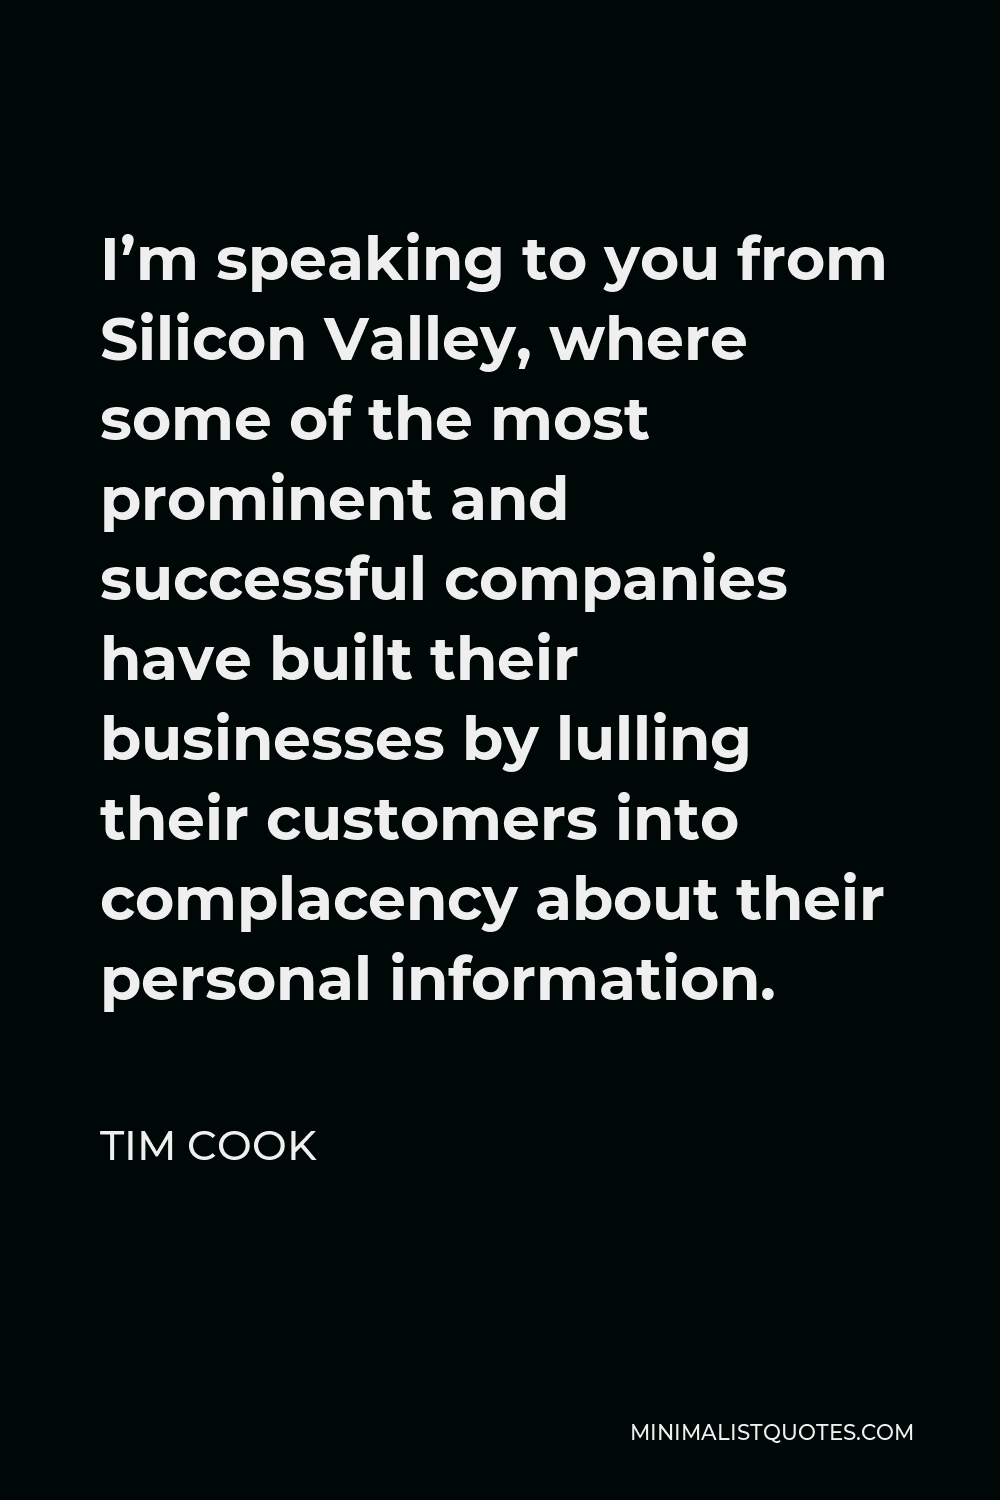 Tim Cook Quote - I’m speaking to you from Silicon Valley, where some of the most prominent and successful companies have built their businesses by lulling their customers into complacency about their personal information.